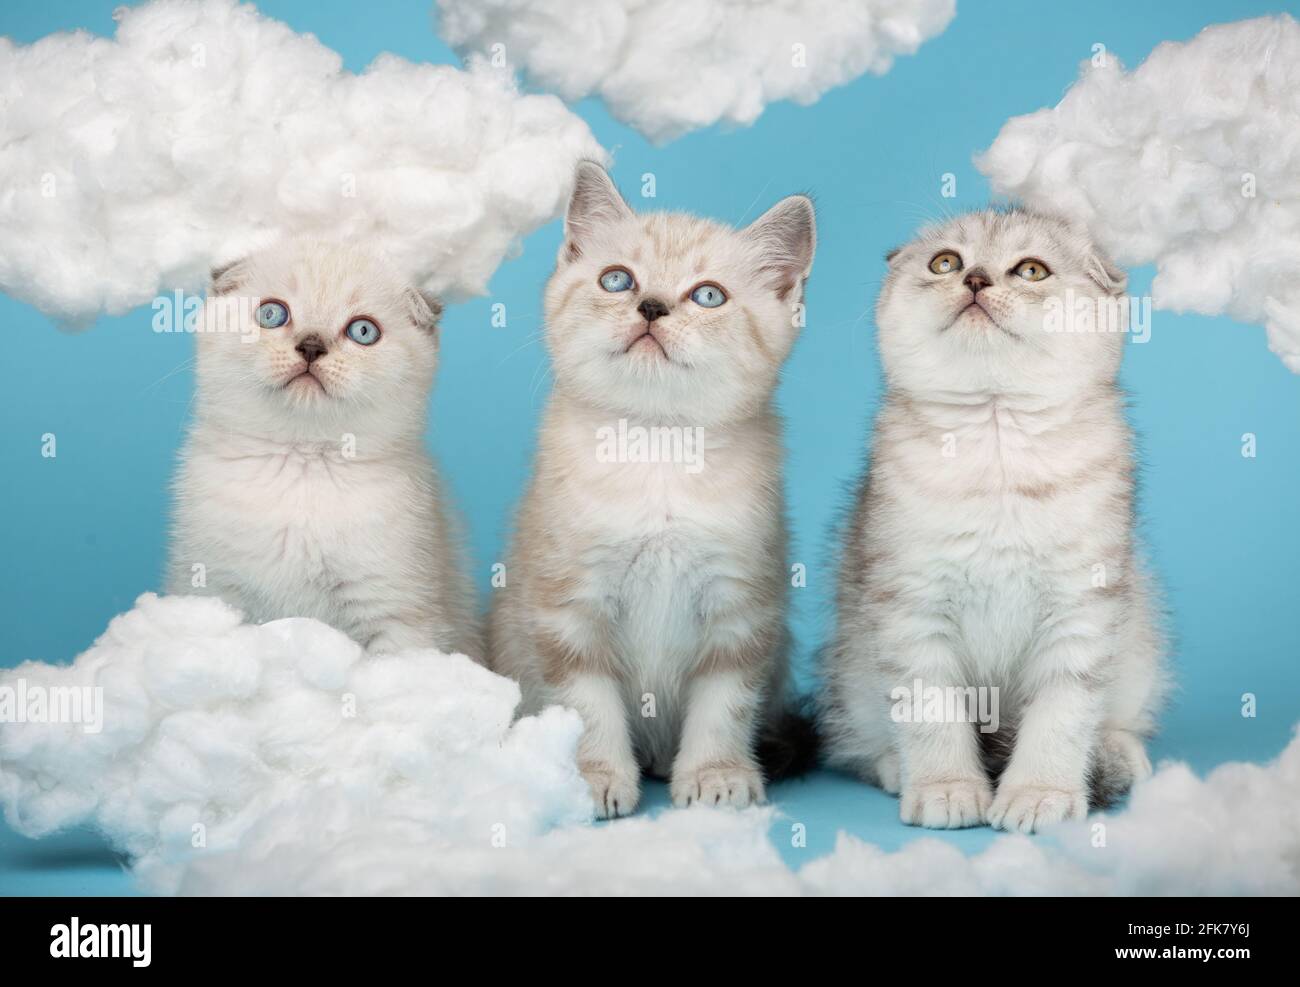 Scottish light gray striped kittens raised their heads and looked up against the sky with white fluffy clouds. Portrait of purebred cats. Photo collec Stock Photo